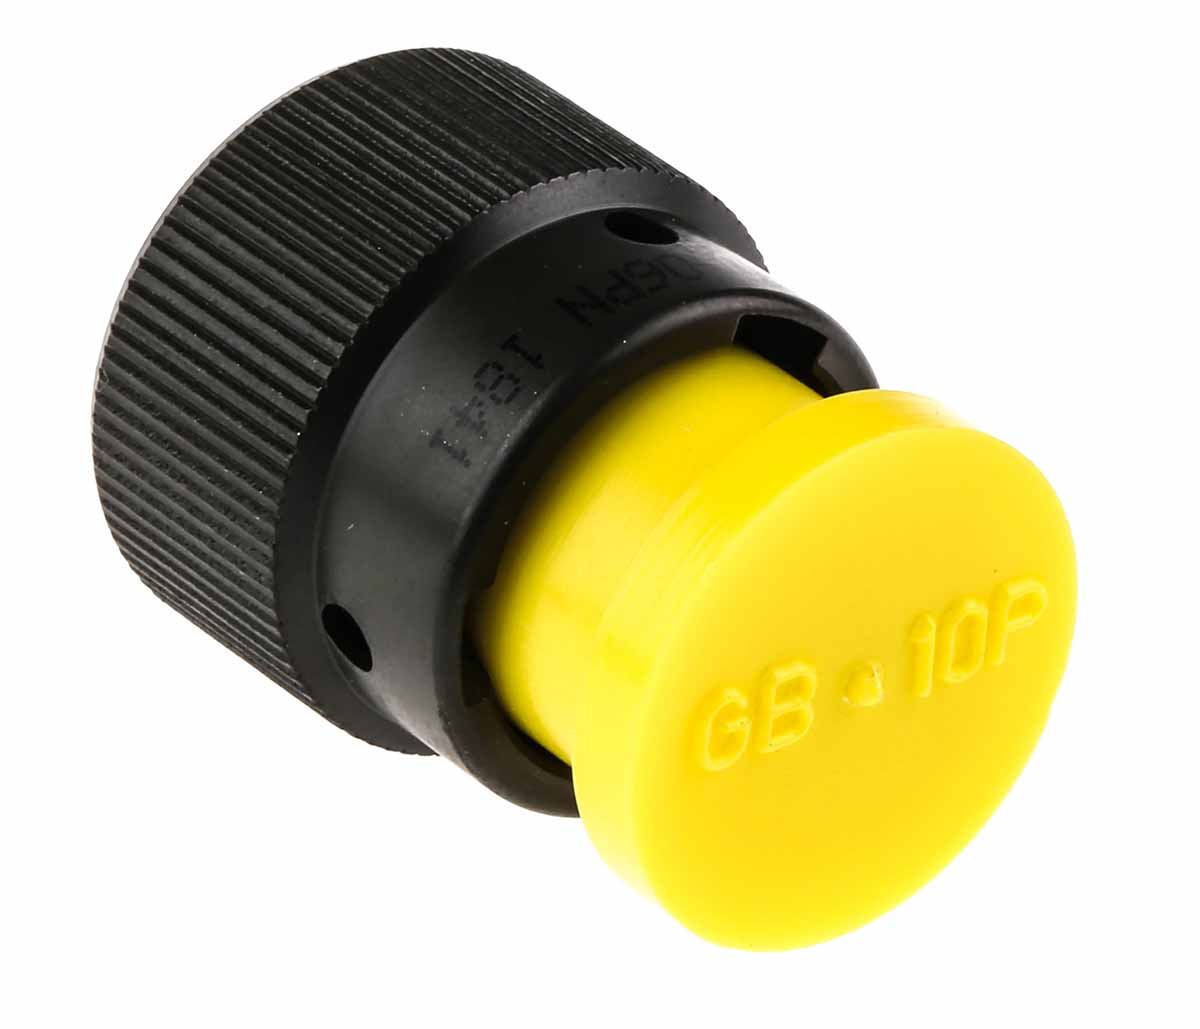 Amphenol Limited, 62GB 6 Way Cable Mount MIL Spec Circular Connector Plug, Pin Contacts,Shell Size 10, Bayonet